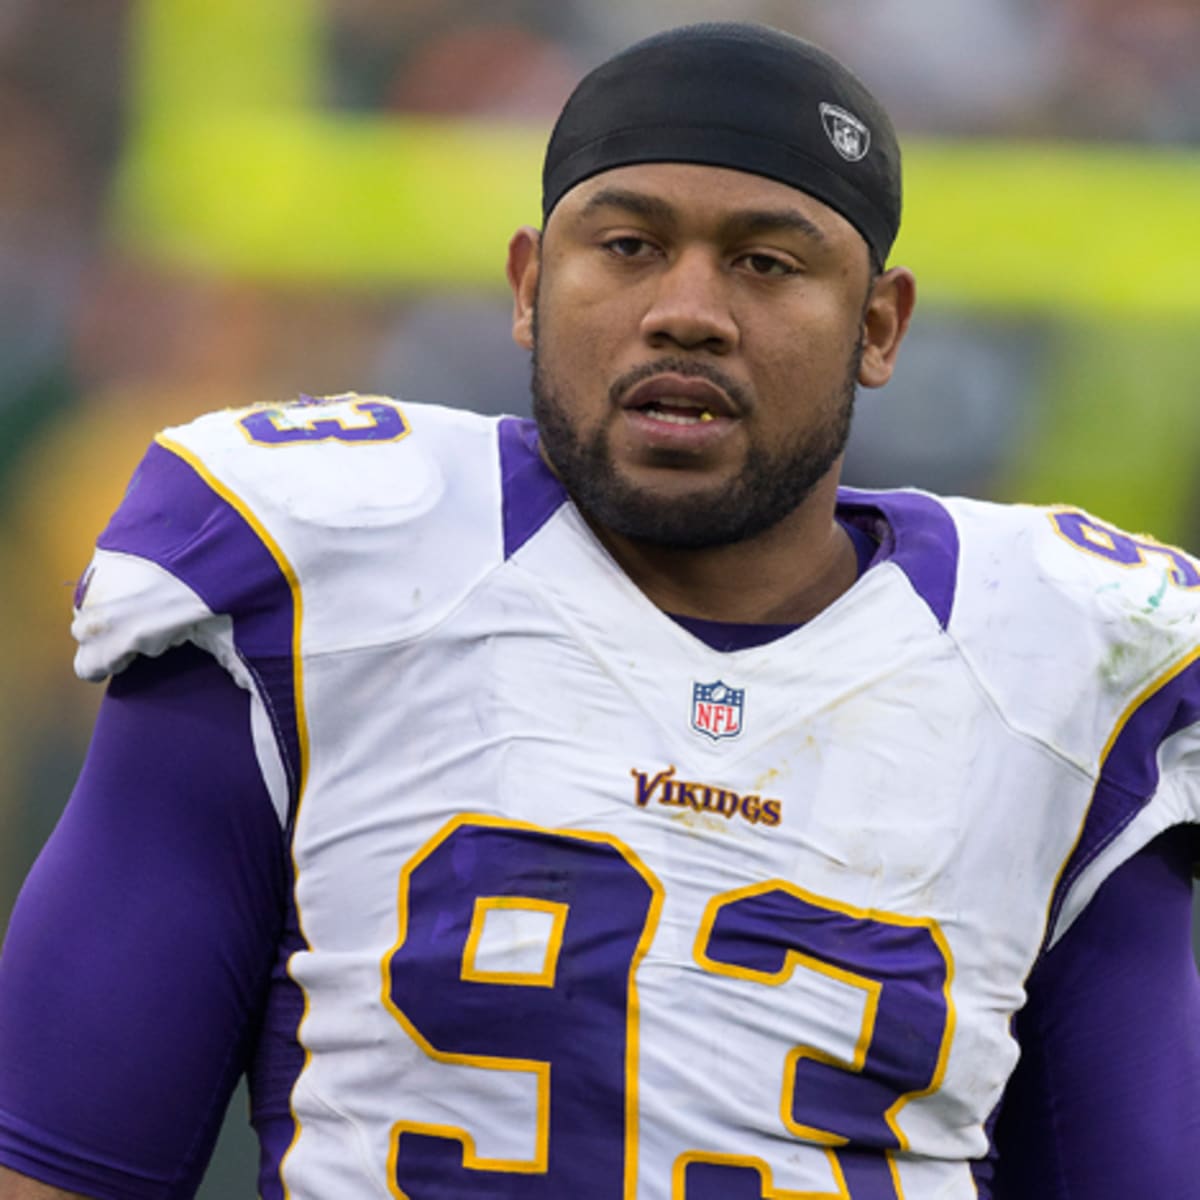 NFL suspends Vikings Kevin Williams for 2 games